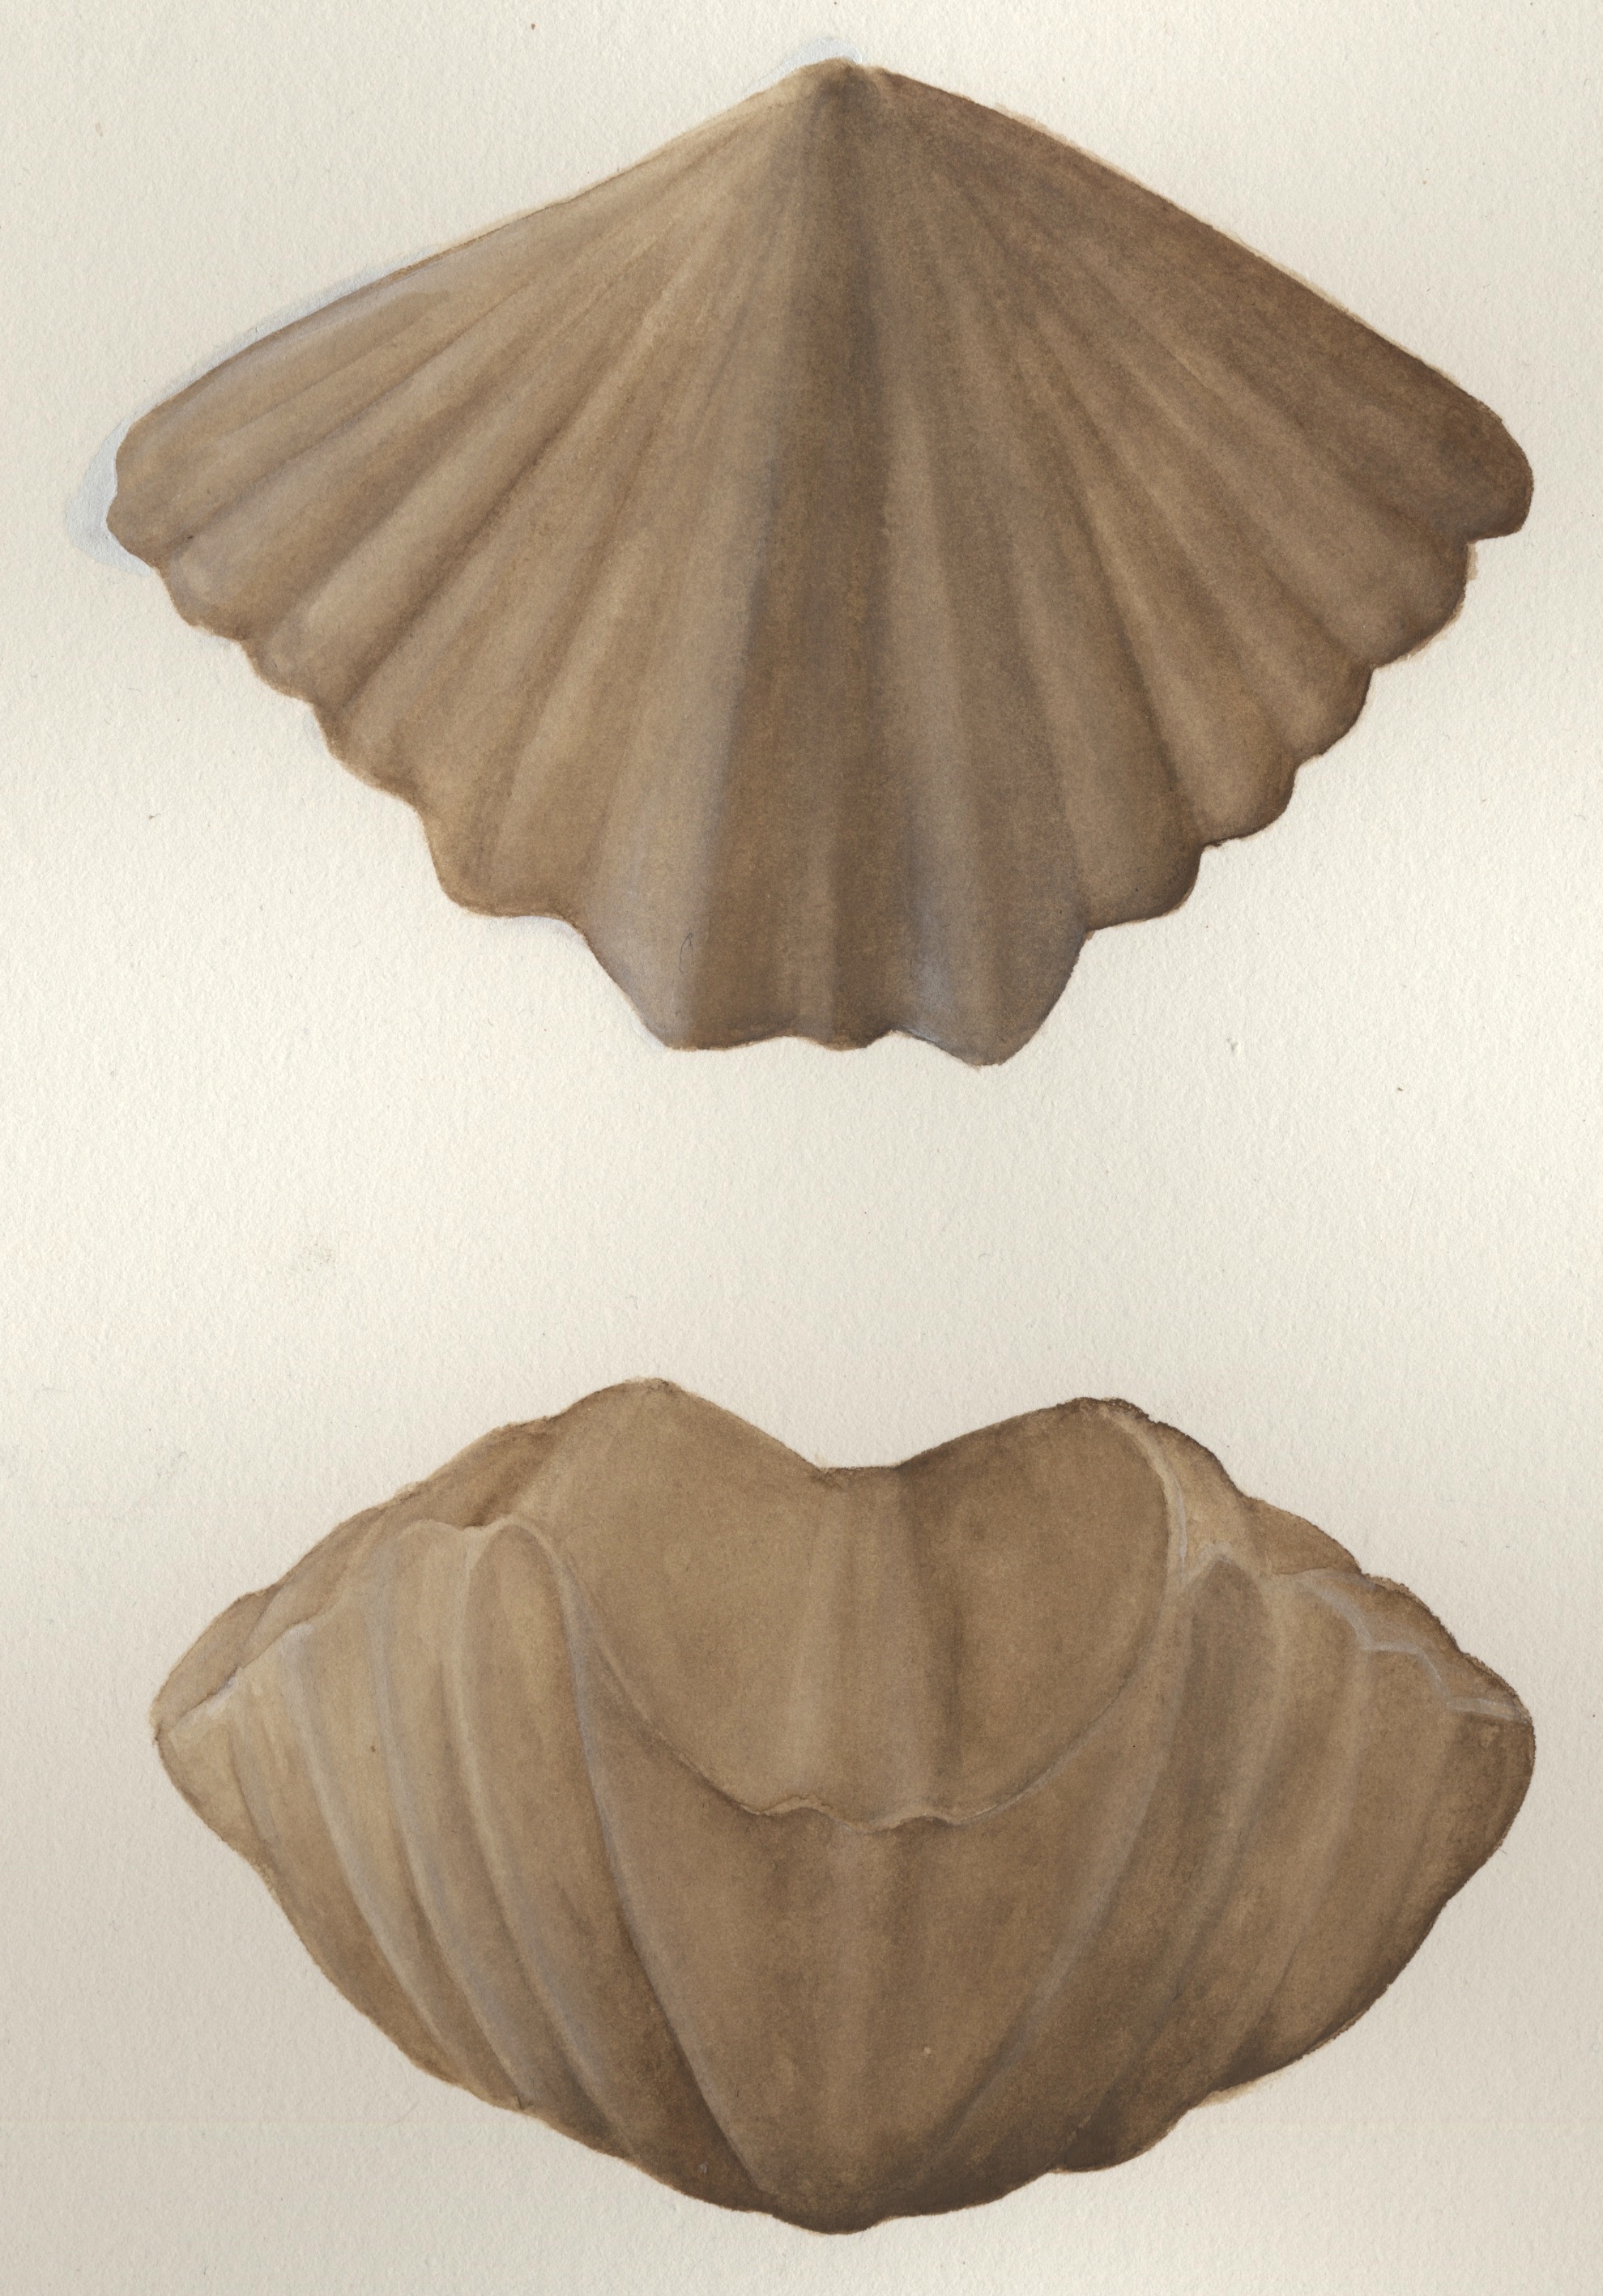 Scientific illustration by Monica Jurik of a Spiriferid brachiopod  based on Howellella sp.   from Chicago and Wisconsin. Common Silurian level bottom community brachiopod from the Chicago - Milwaukee area. The illustration is a water color based on specimens in our collections.